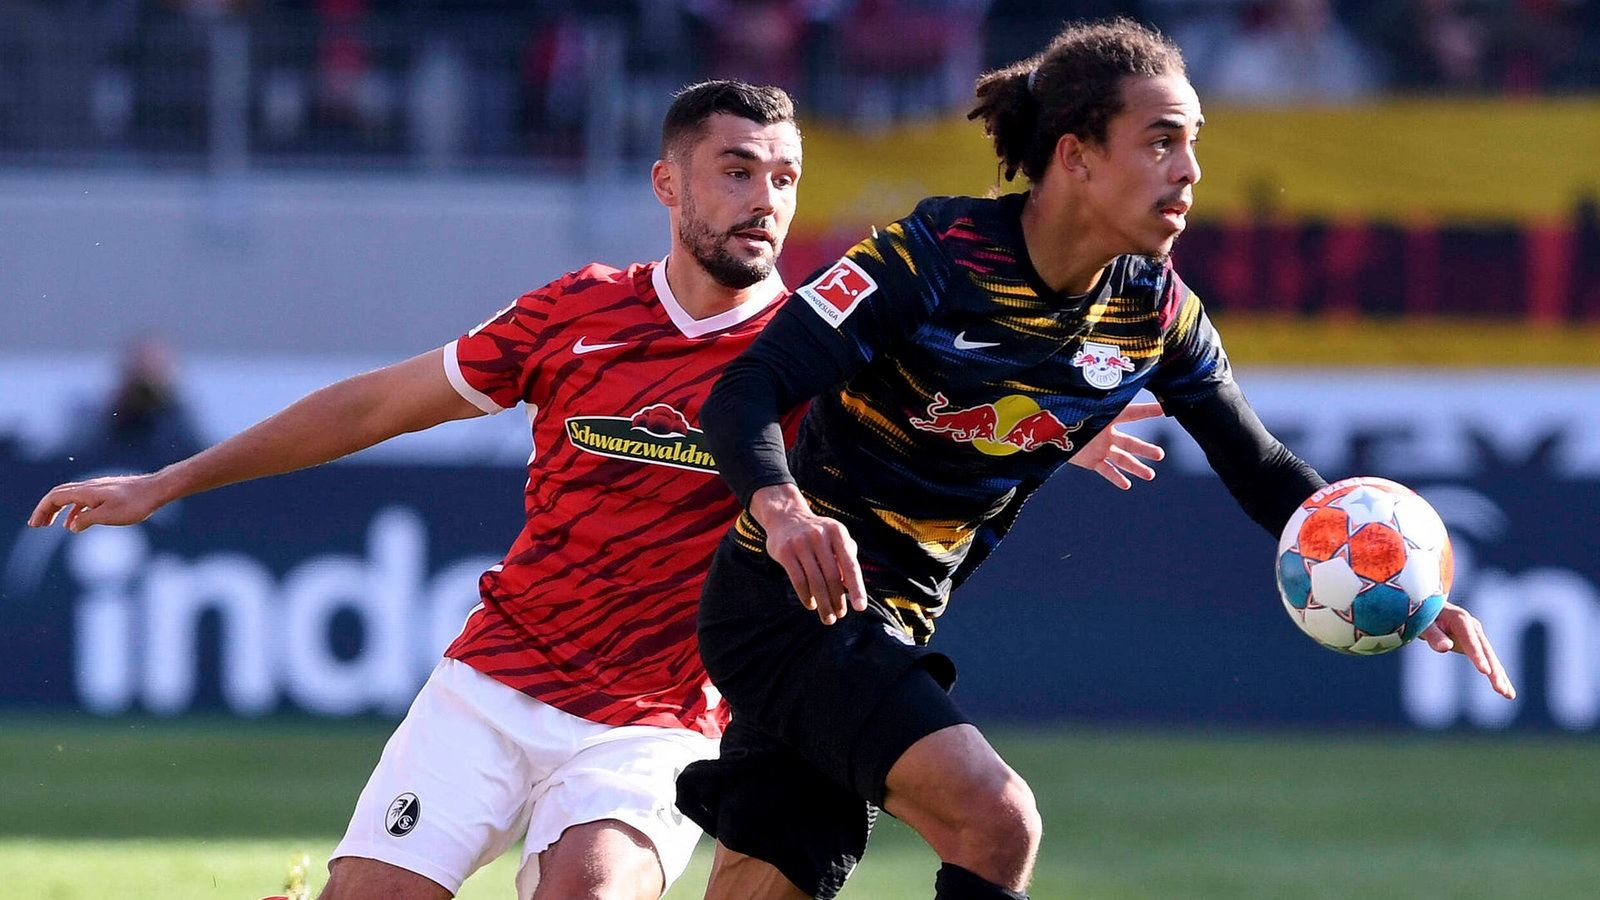 DFB Cup final: Freiburg vs RB Leipzig Match Preview, Where to Watch, Odds and Lineups | May 21